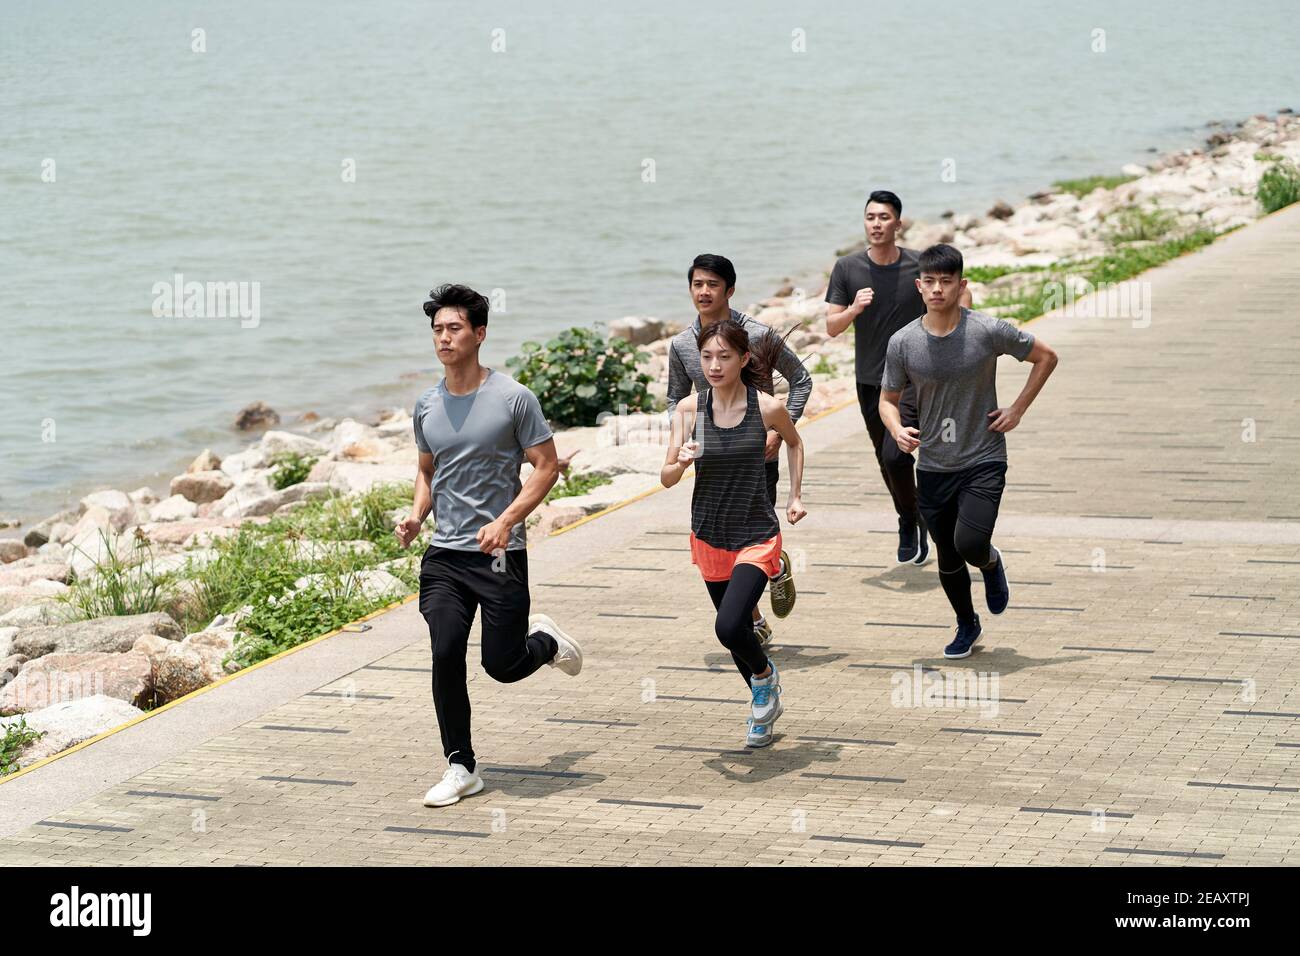 group of five young asian adults running outdoors in seaside park Stock Photo